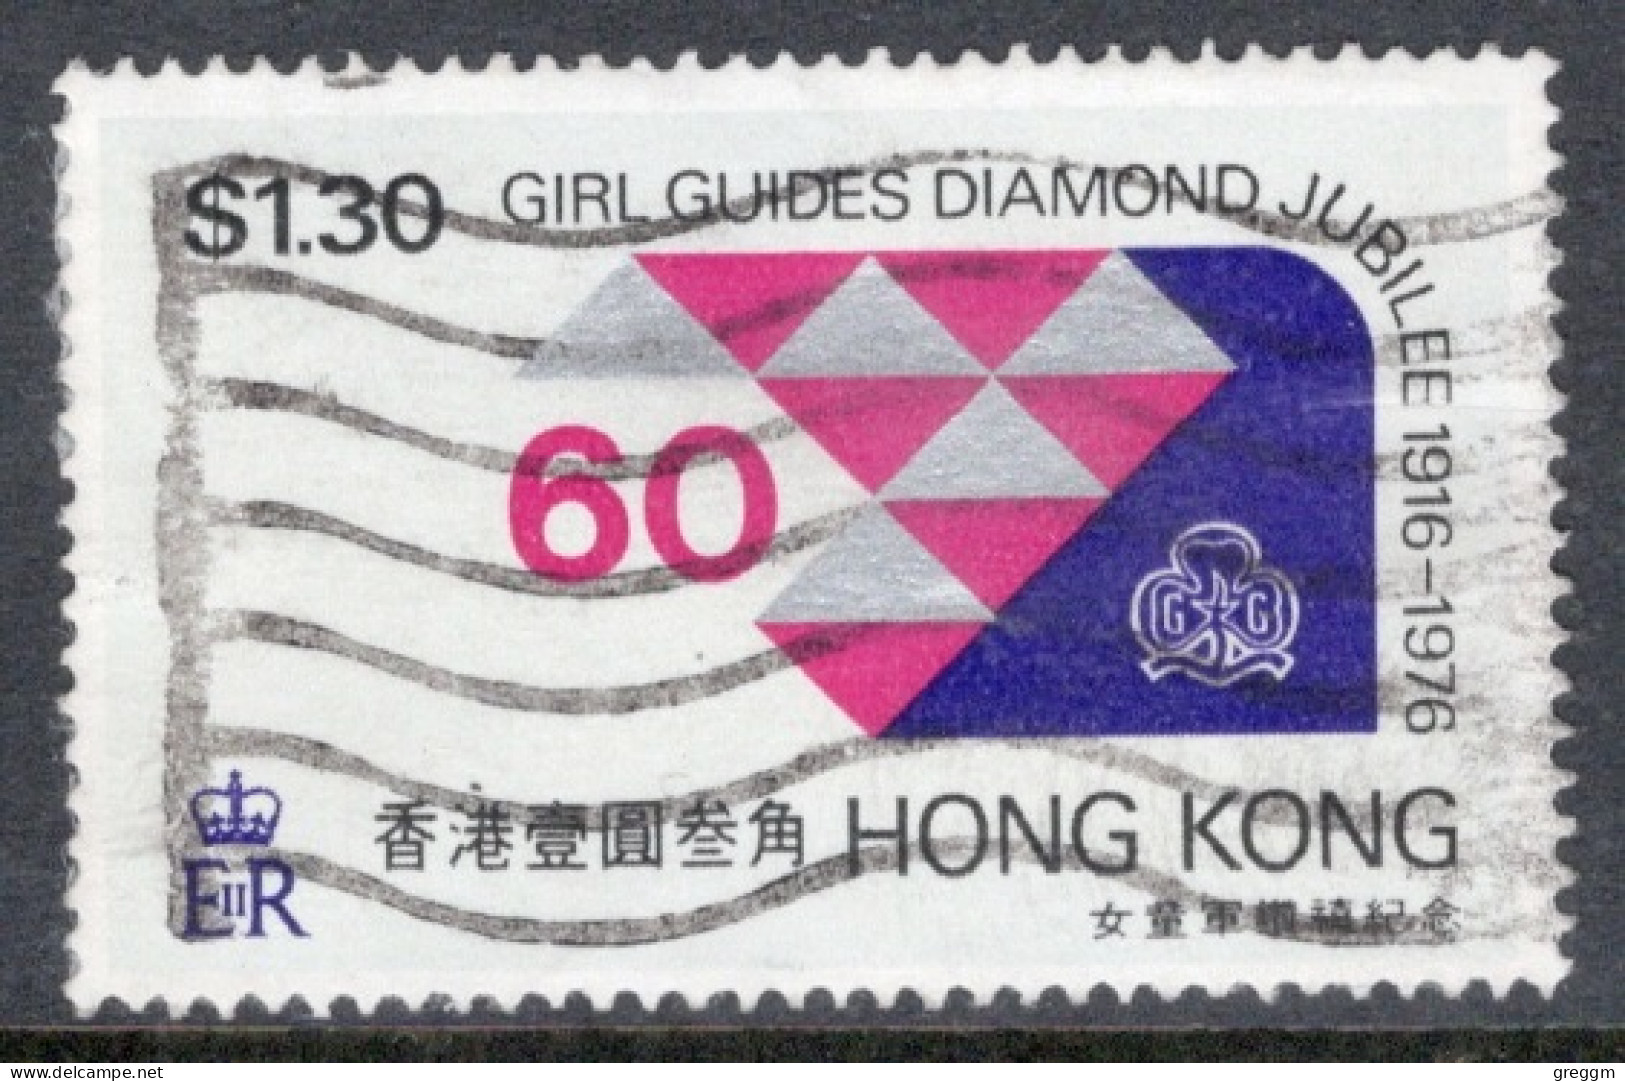 Hong Kong 1976 A Single Stamp To Celebrate The 60th Anniversary Of Girl Guides In Fine Used - Oblitérés